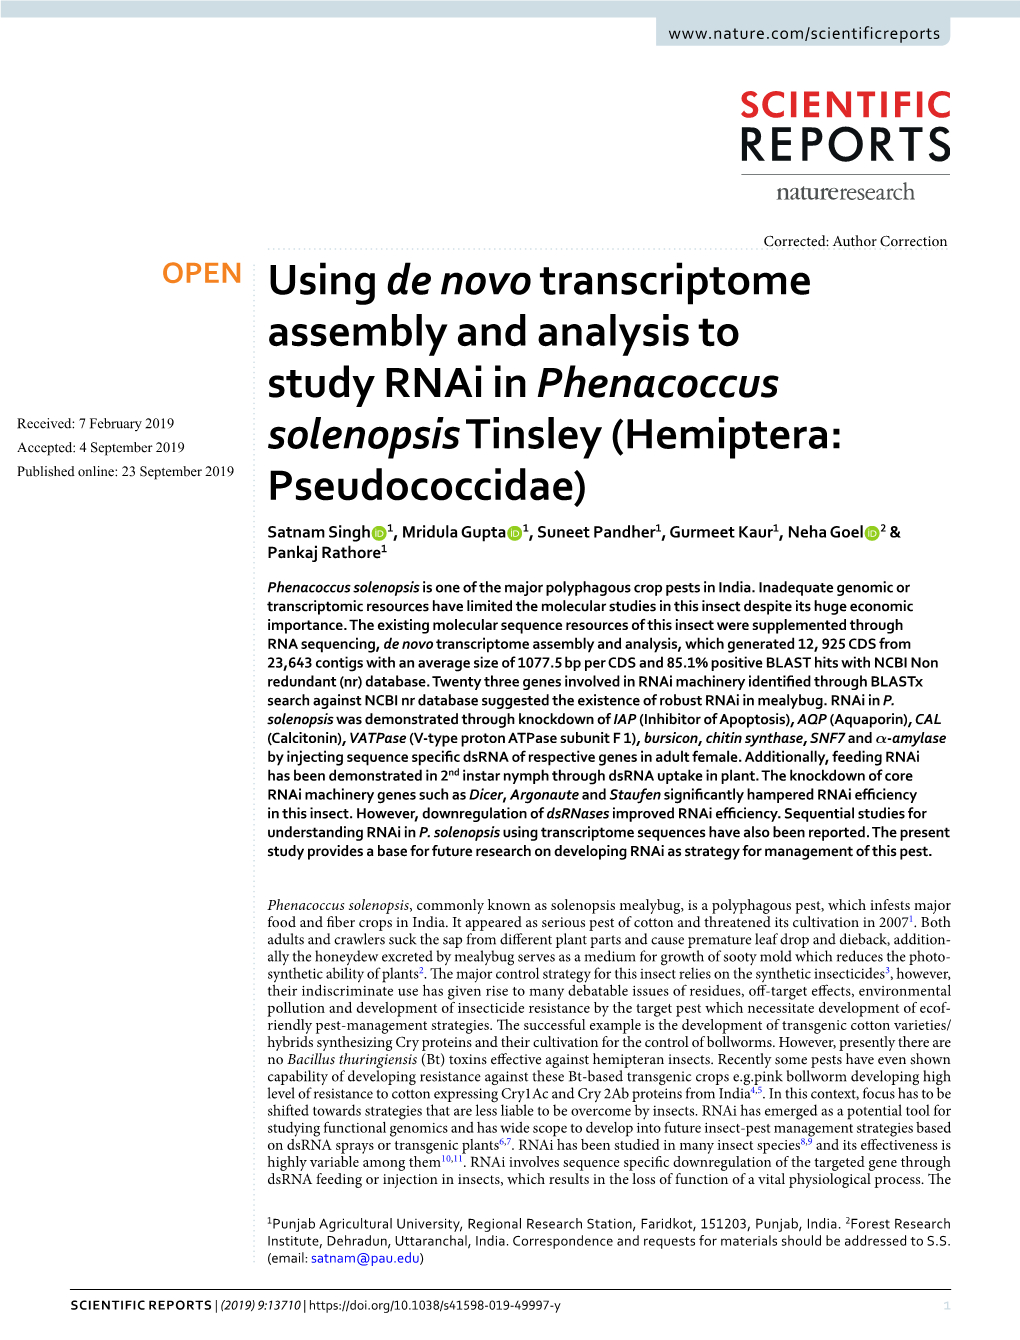 Using De Novotranscriptome Assembly and Analysis to Study Rnai In